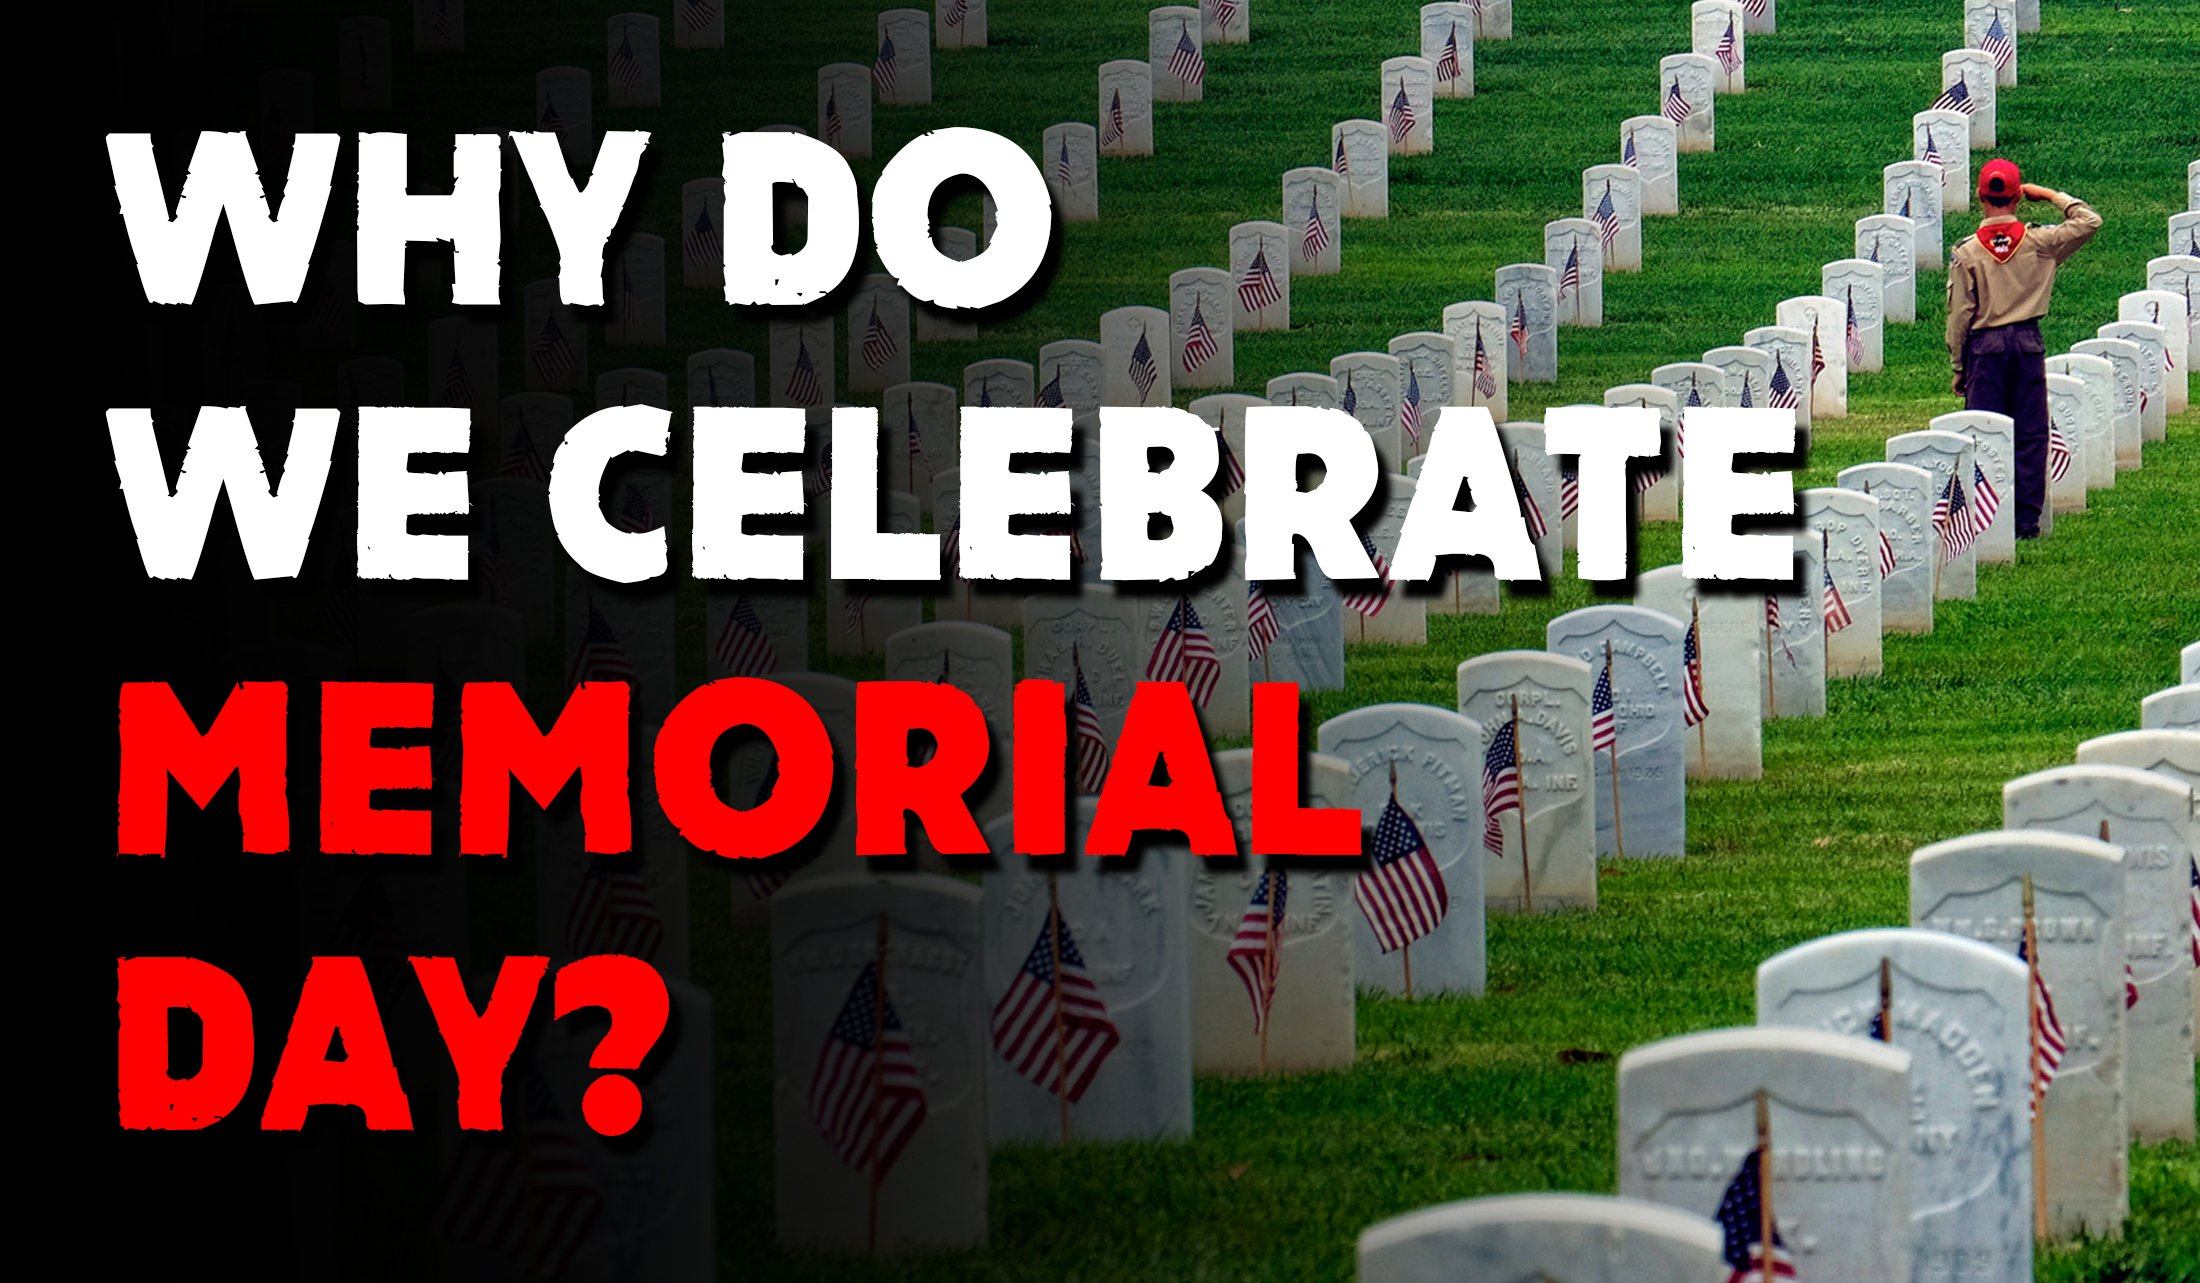 Why do we even celebrate Memorial Day?